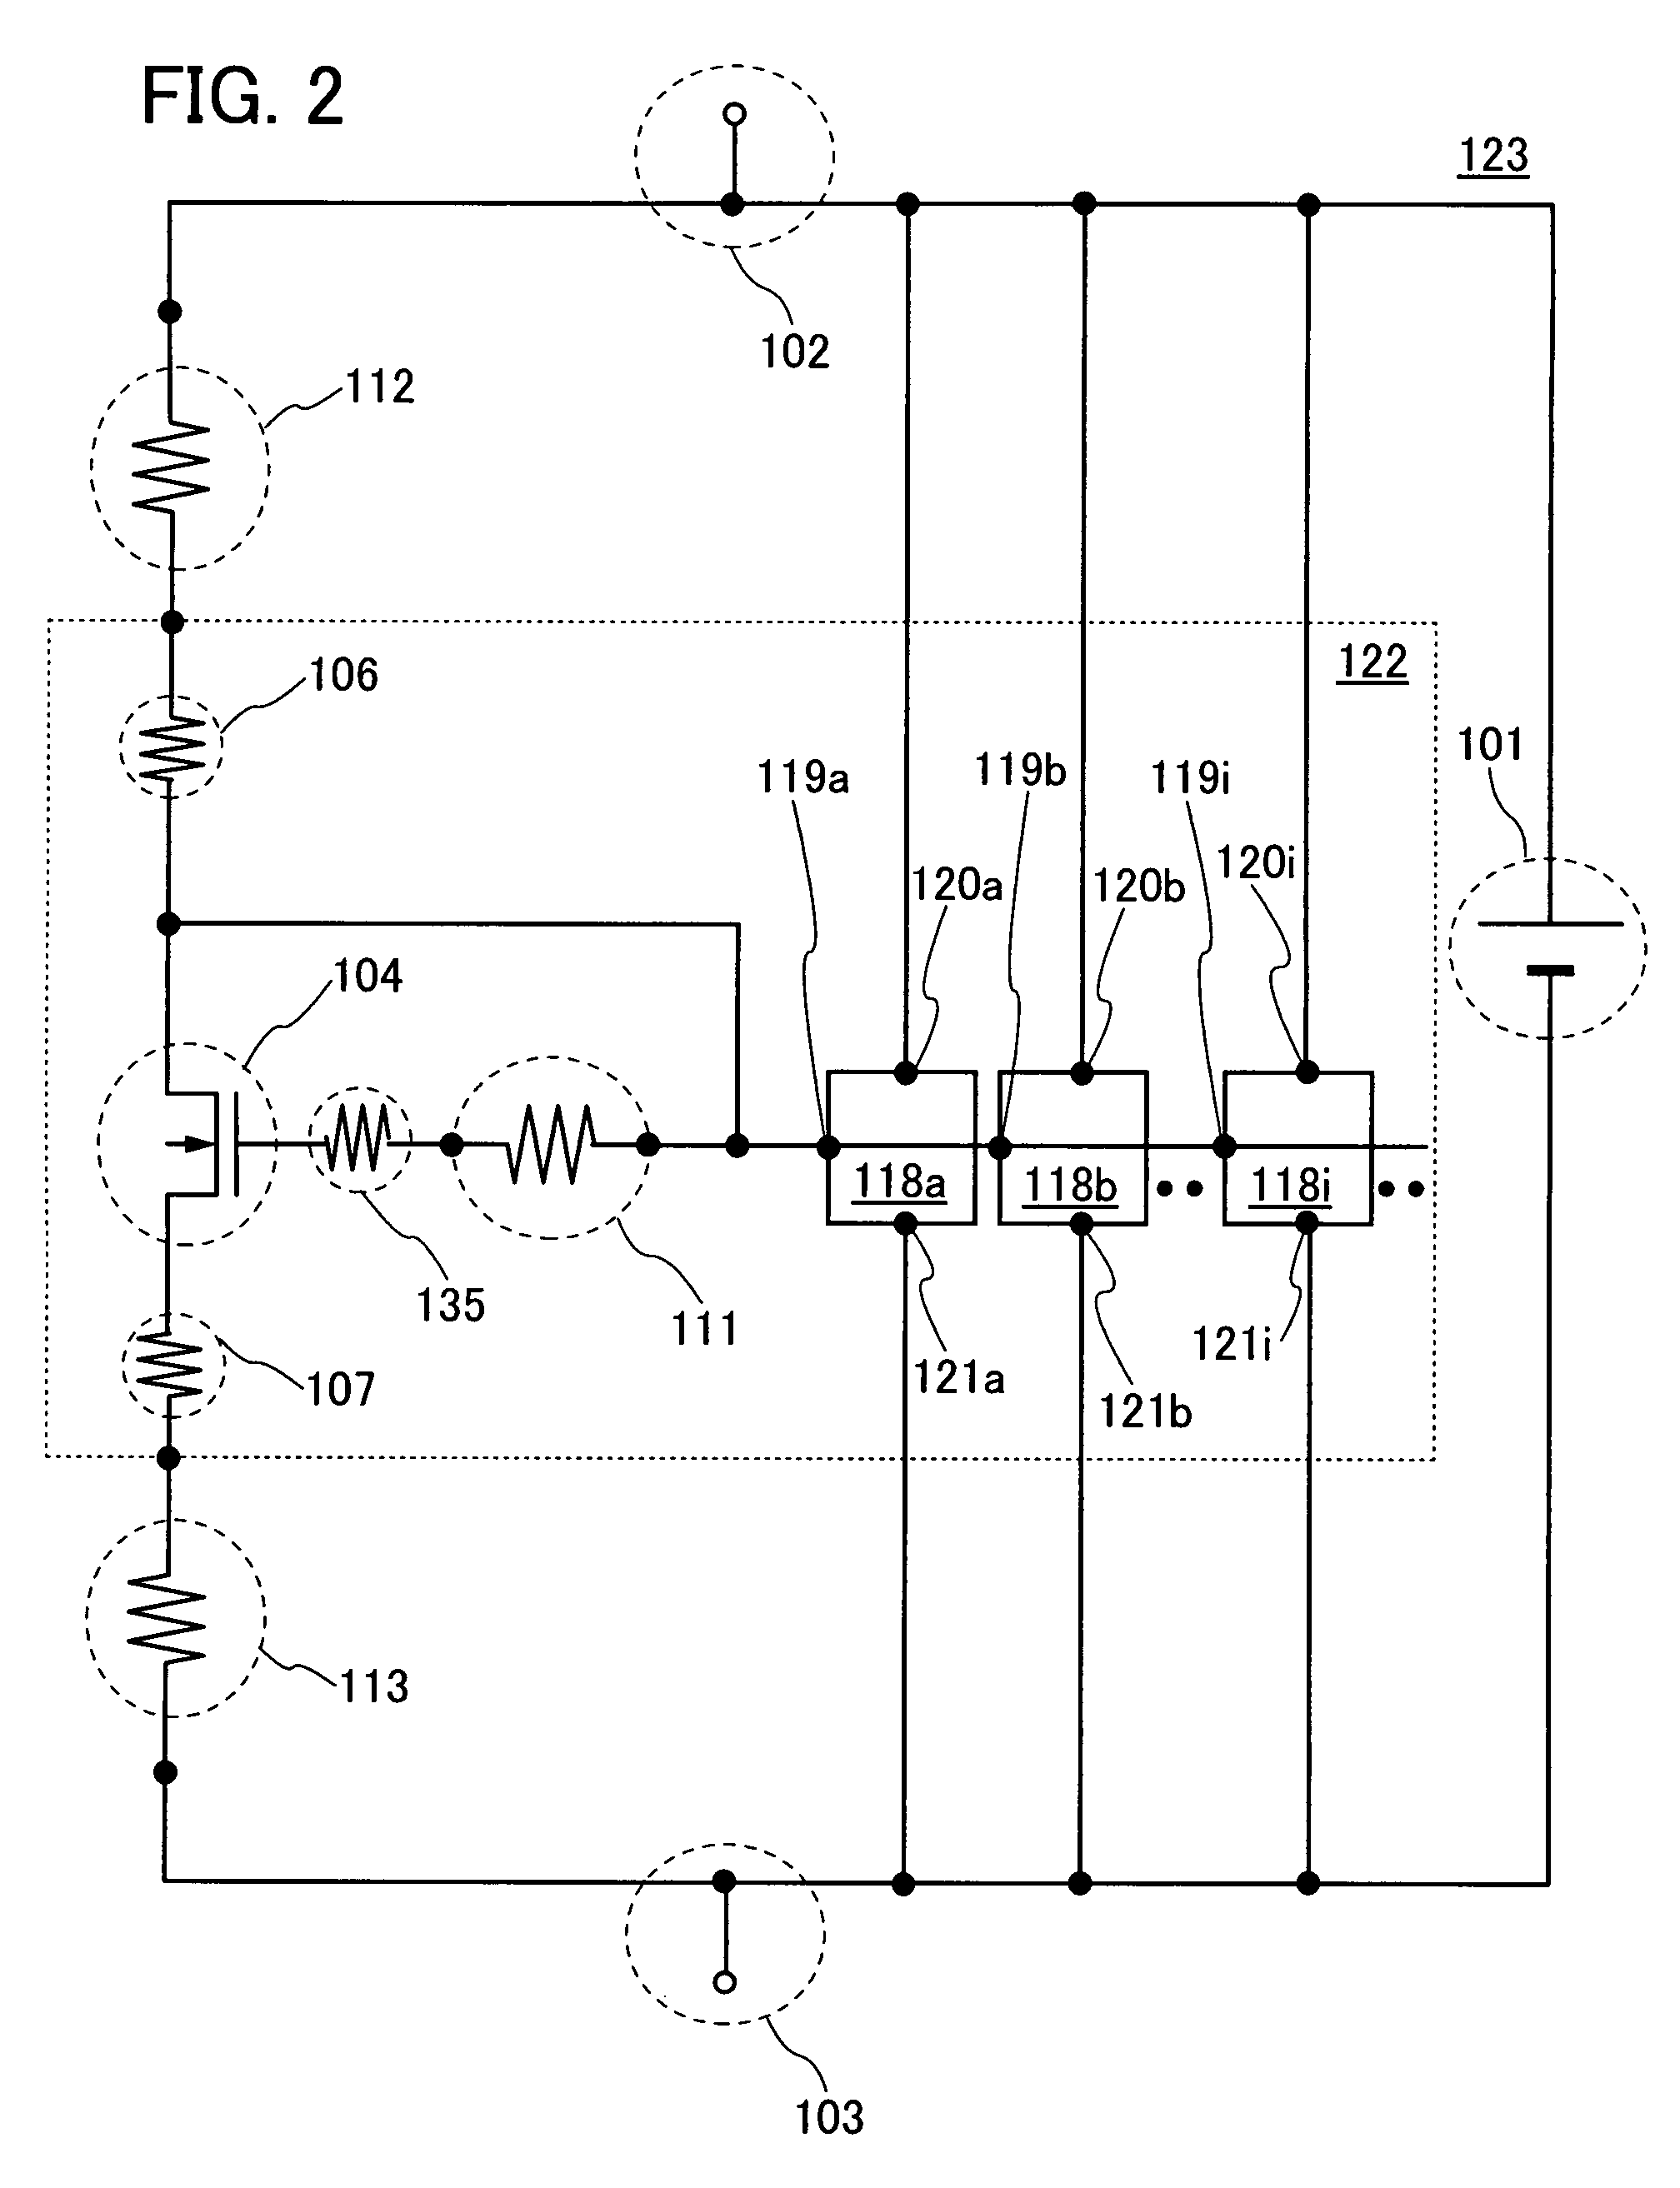 Semiconductor device including a current mirror circuit